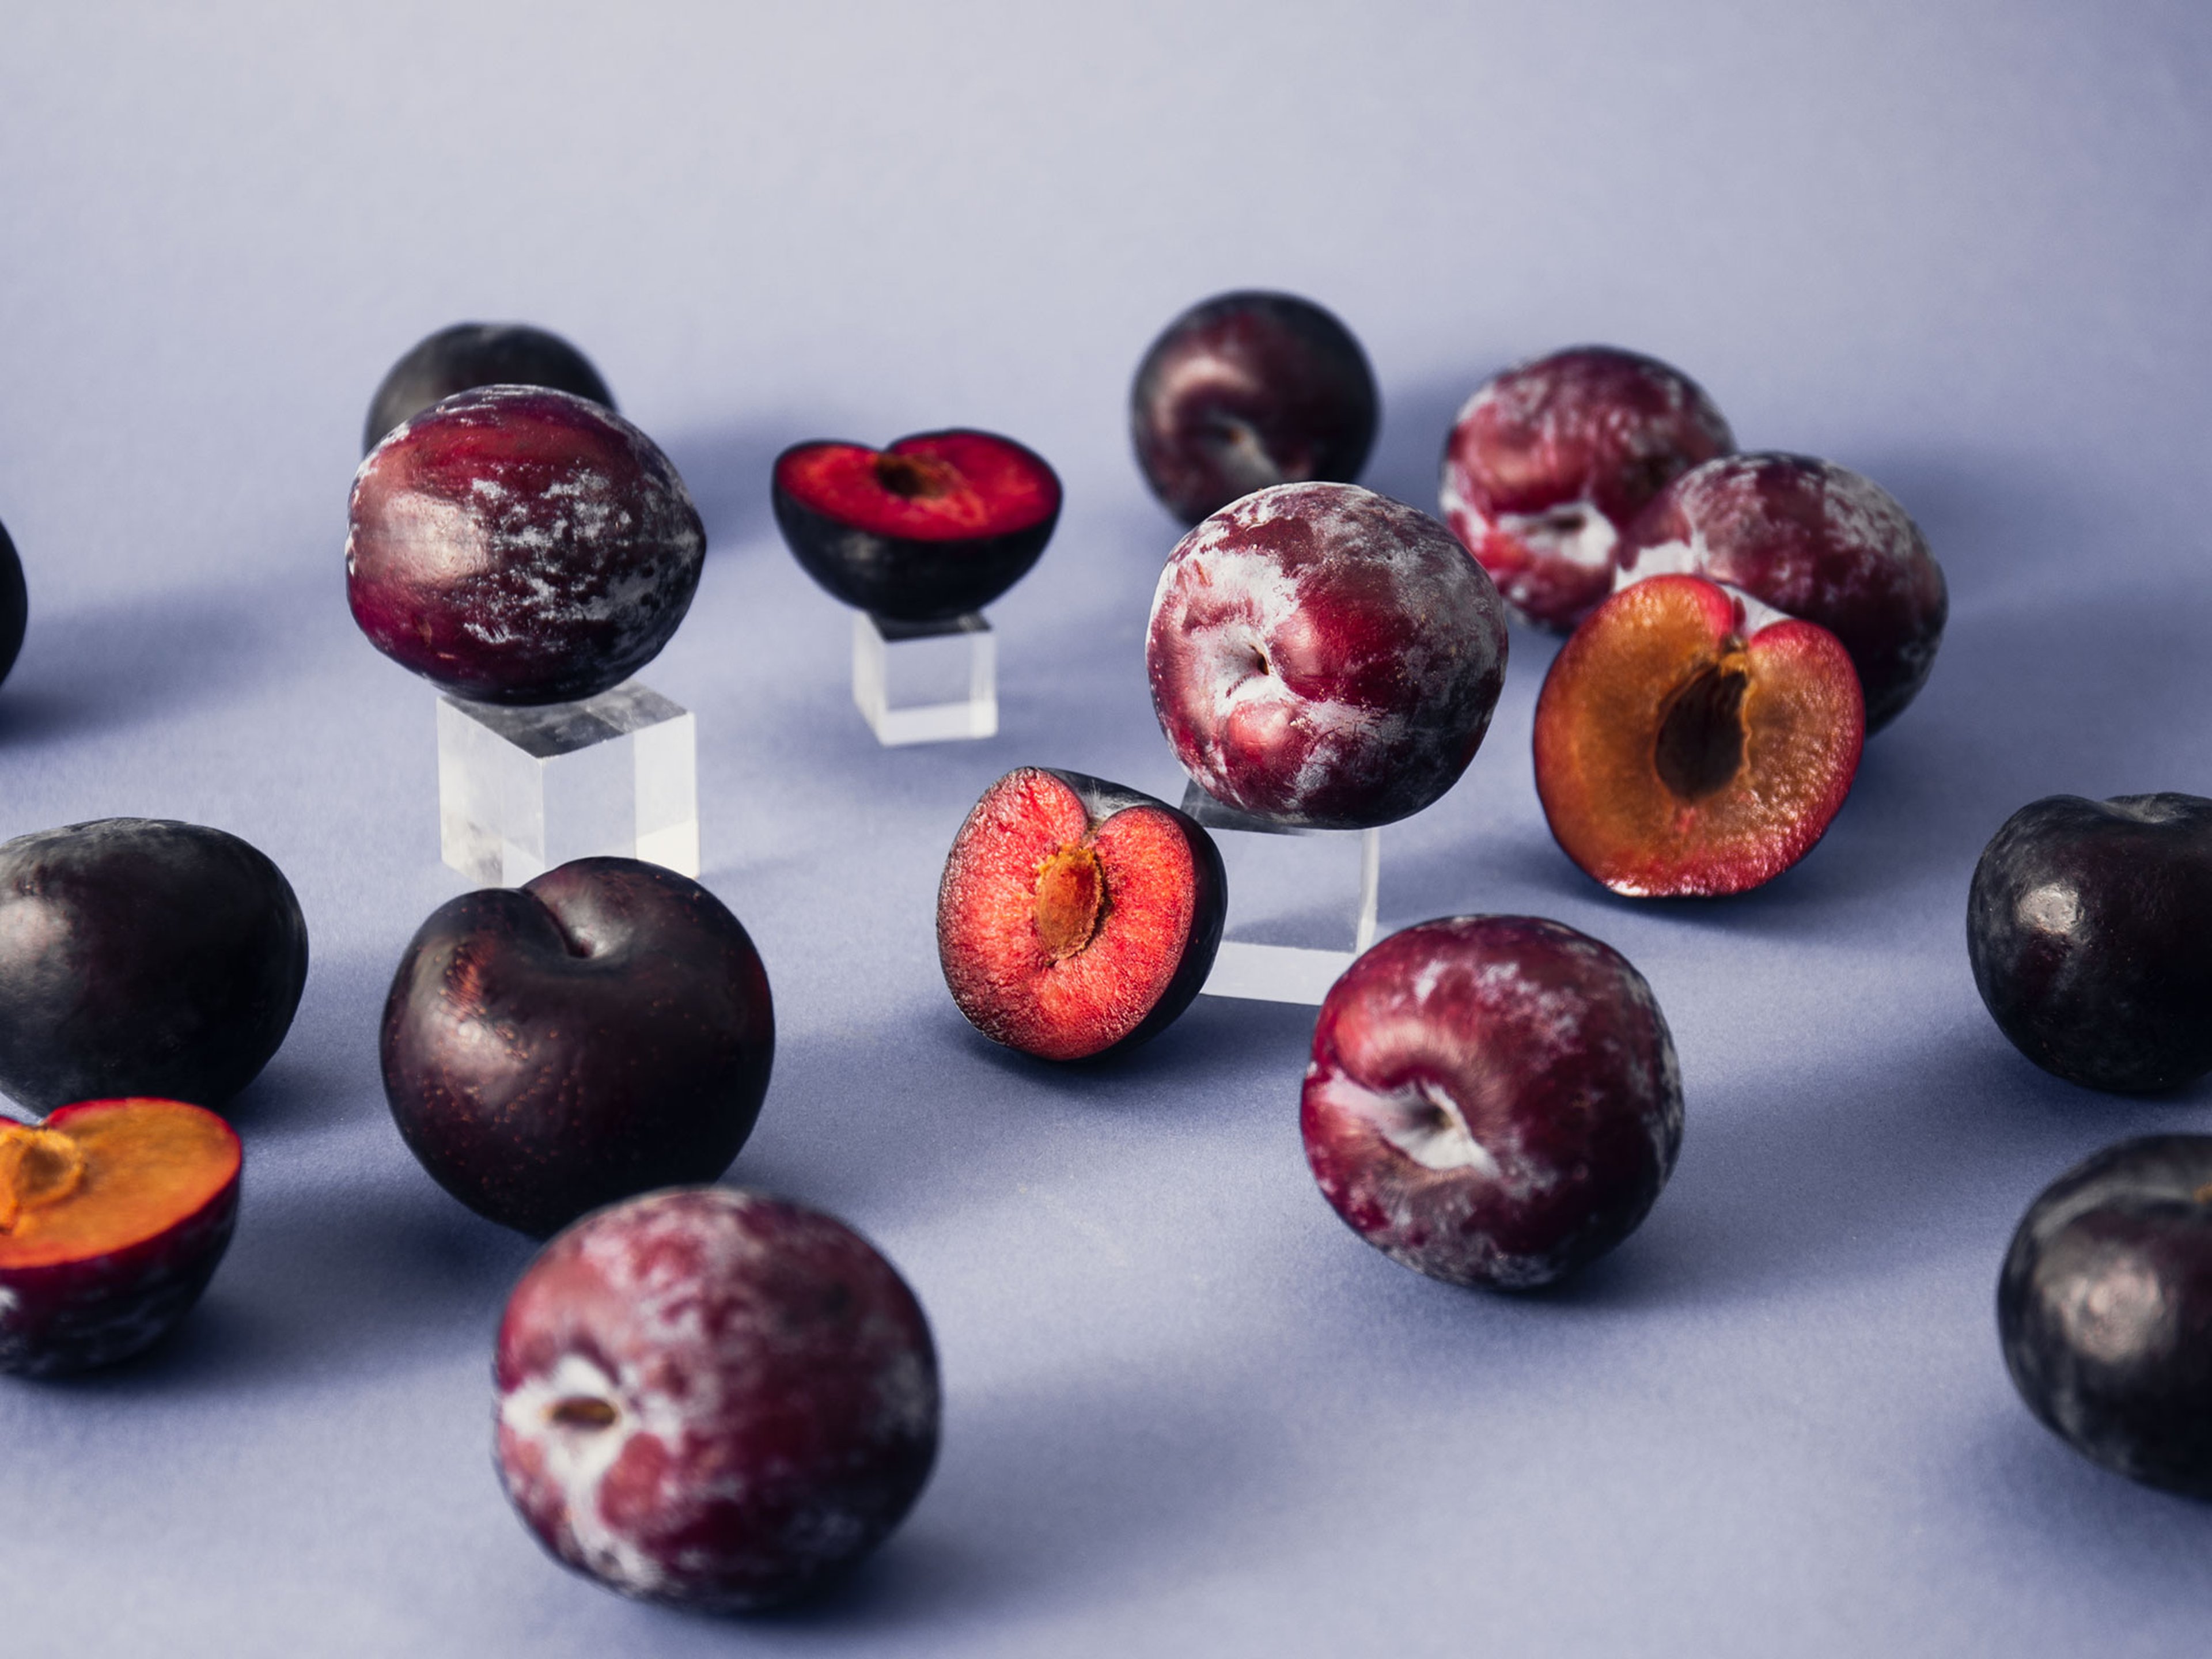 All About Plums - How to Pick, Prepare & Store